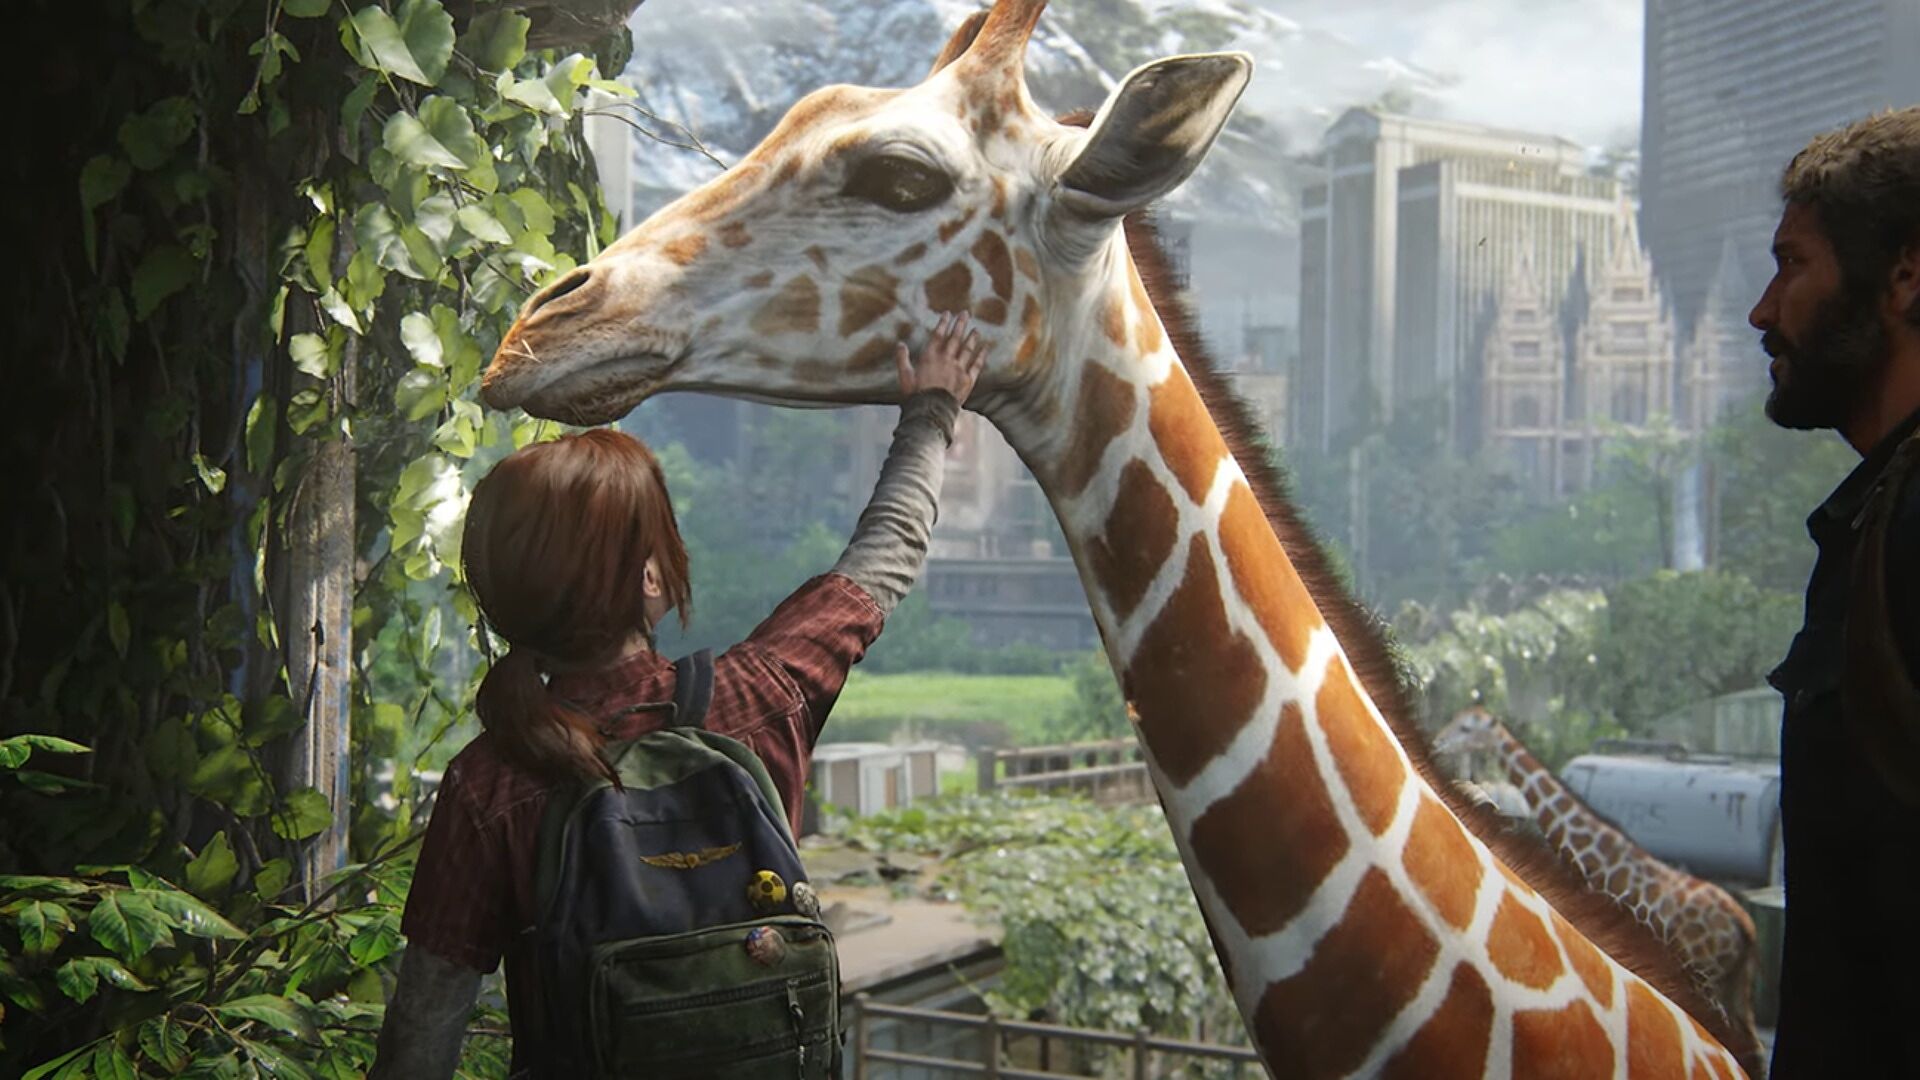 Naughty Dog Abandons The Last of Us Online for New Single-Player